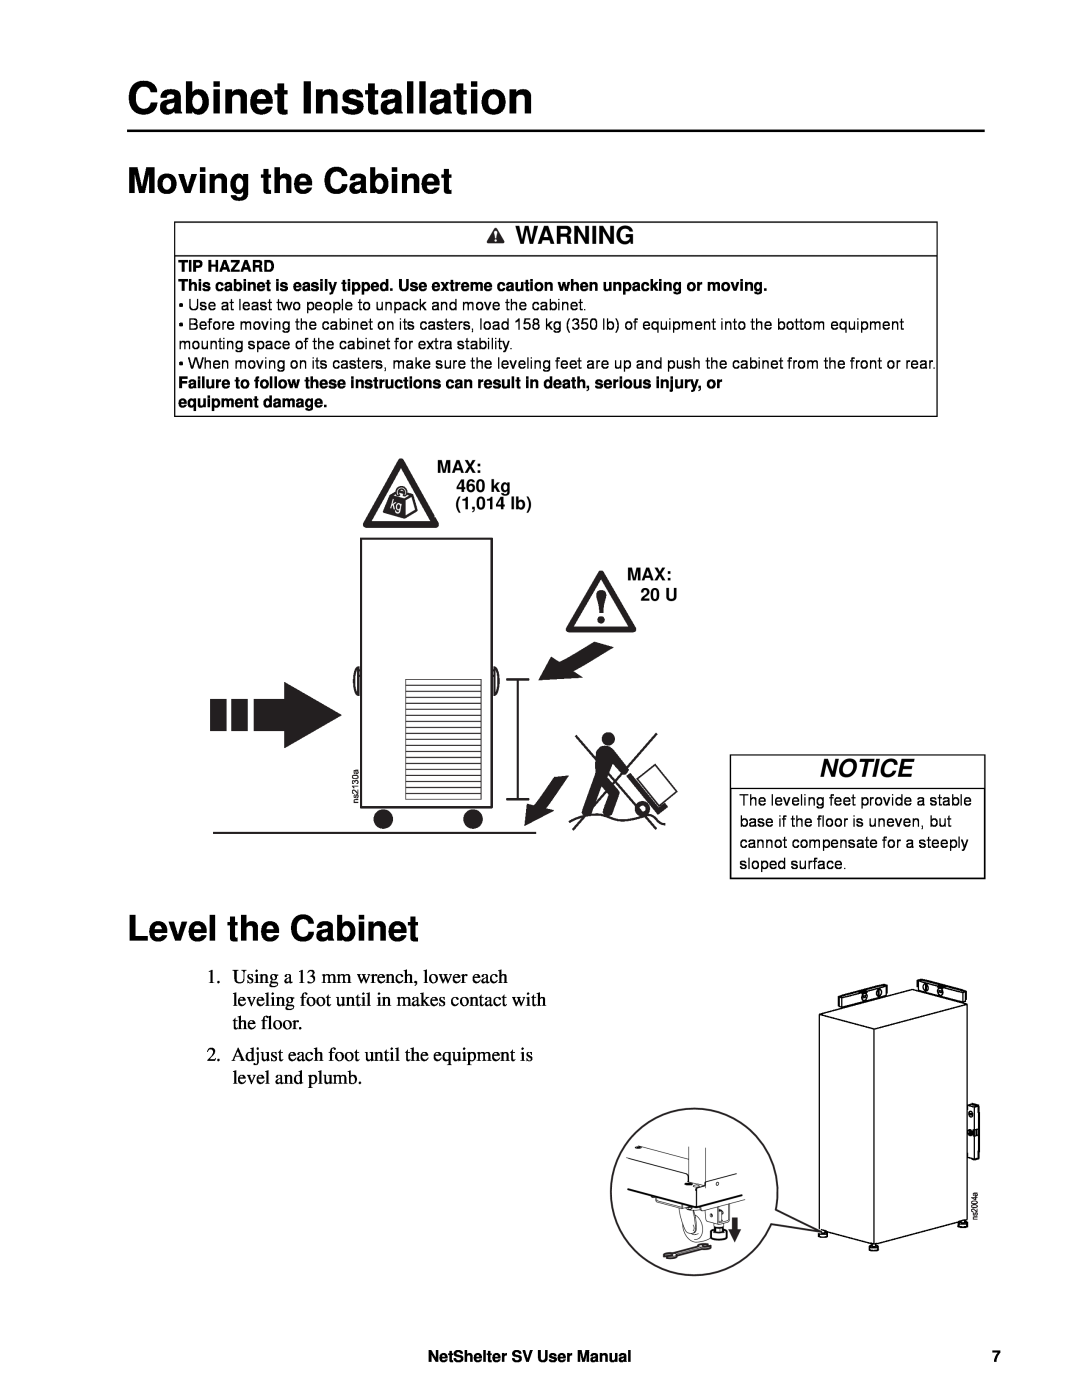 APC AR2400 user manual Cabinet Installation, Moving the Cabinet, Level the Cabinet, Notice 